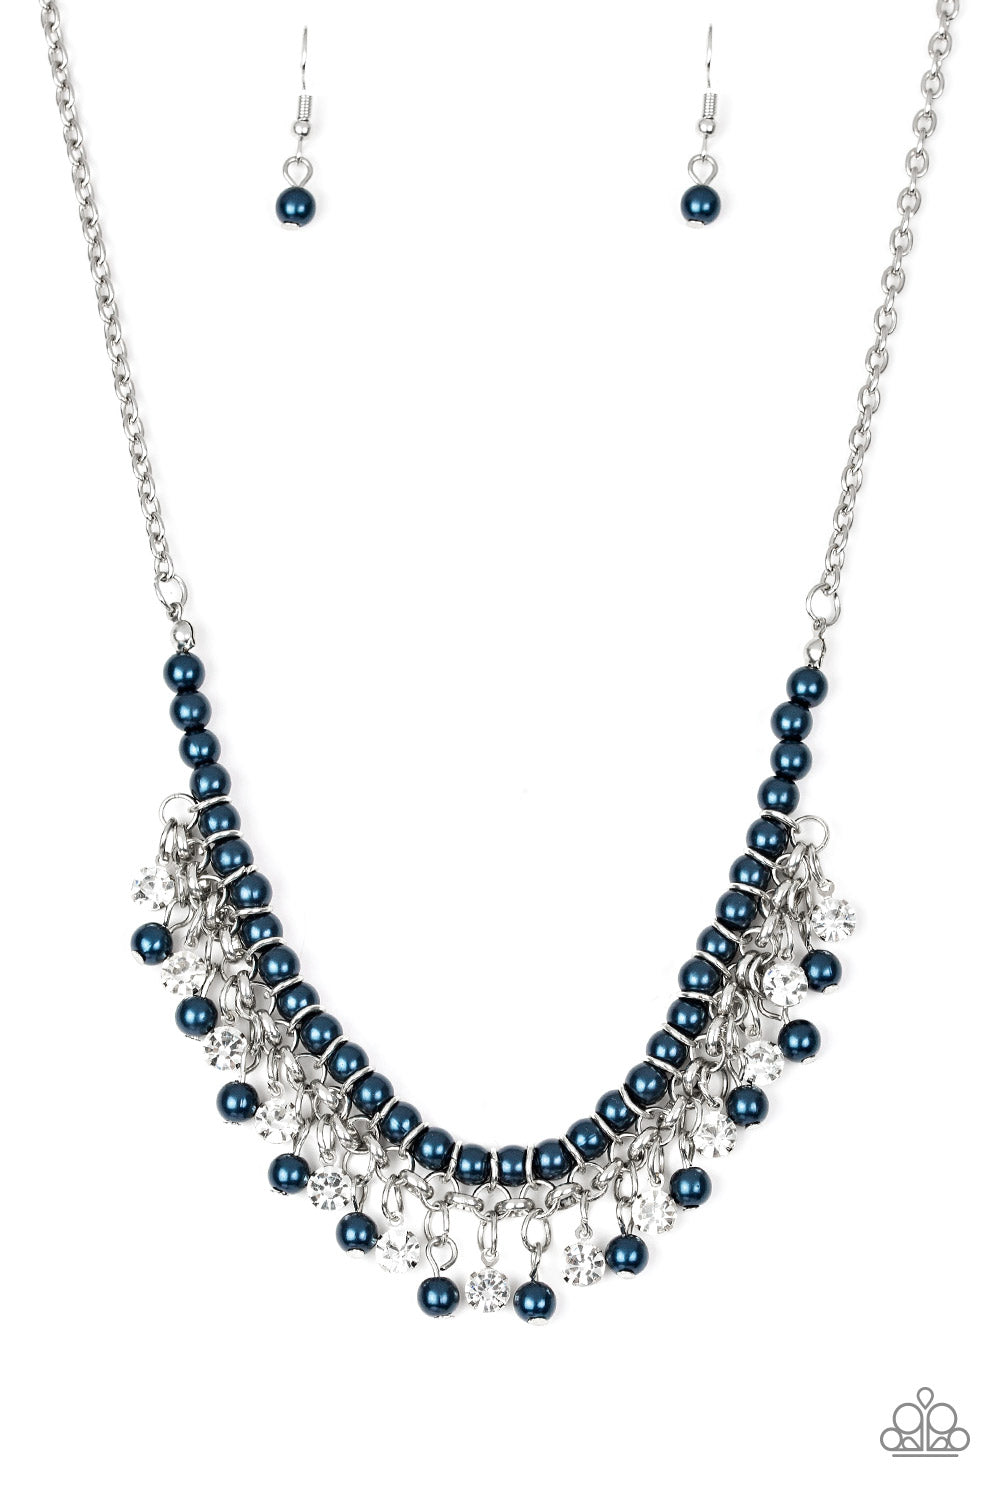 A Touch of CLASSY - Blue Necklace Set